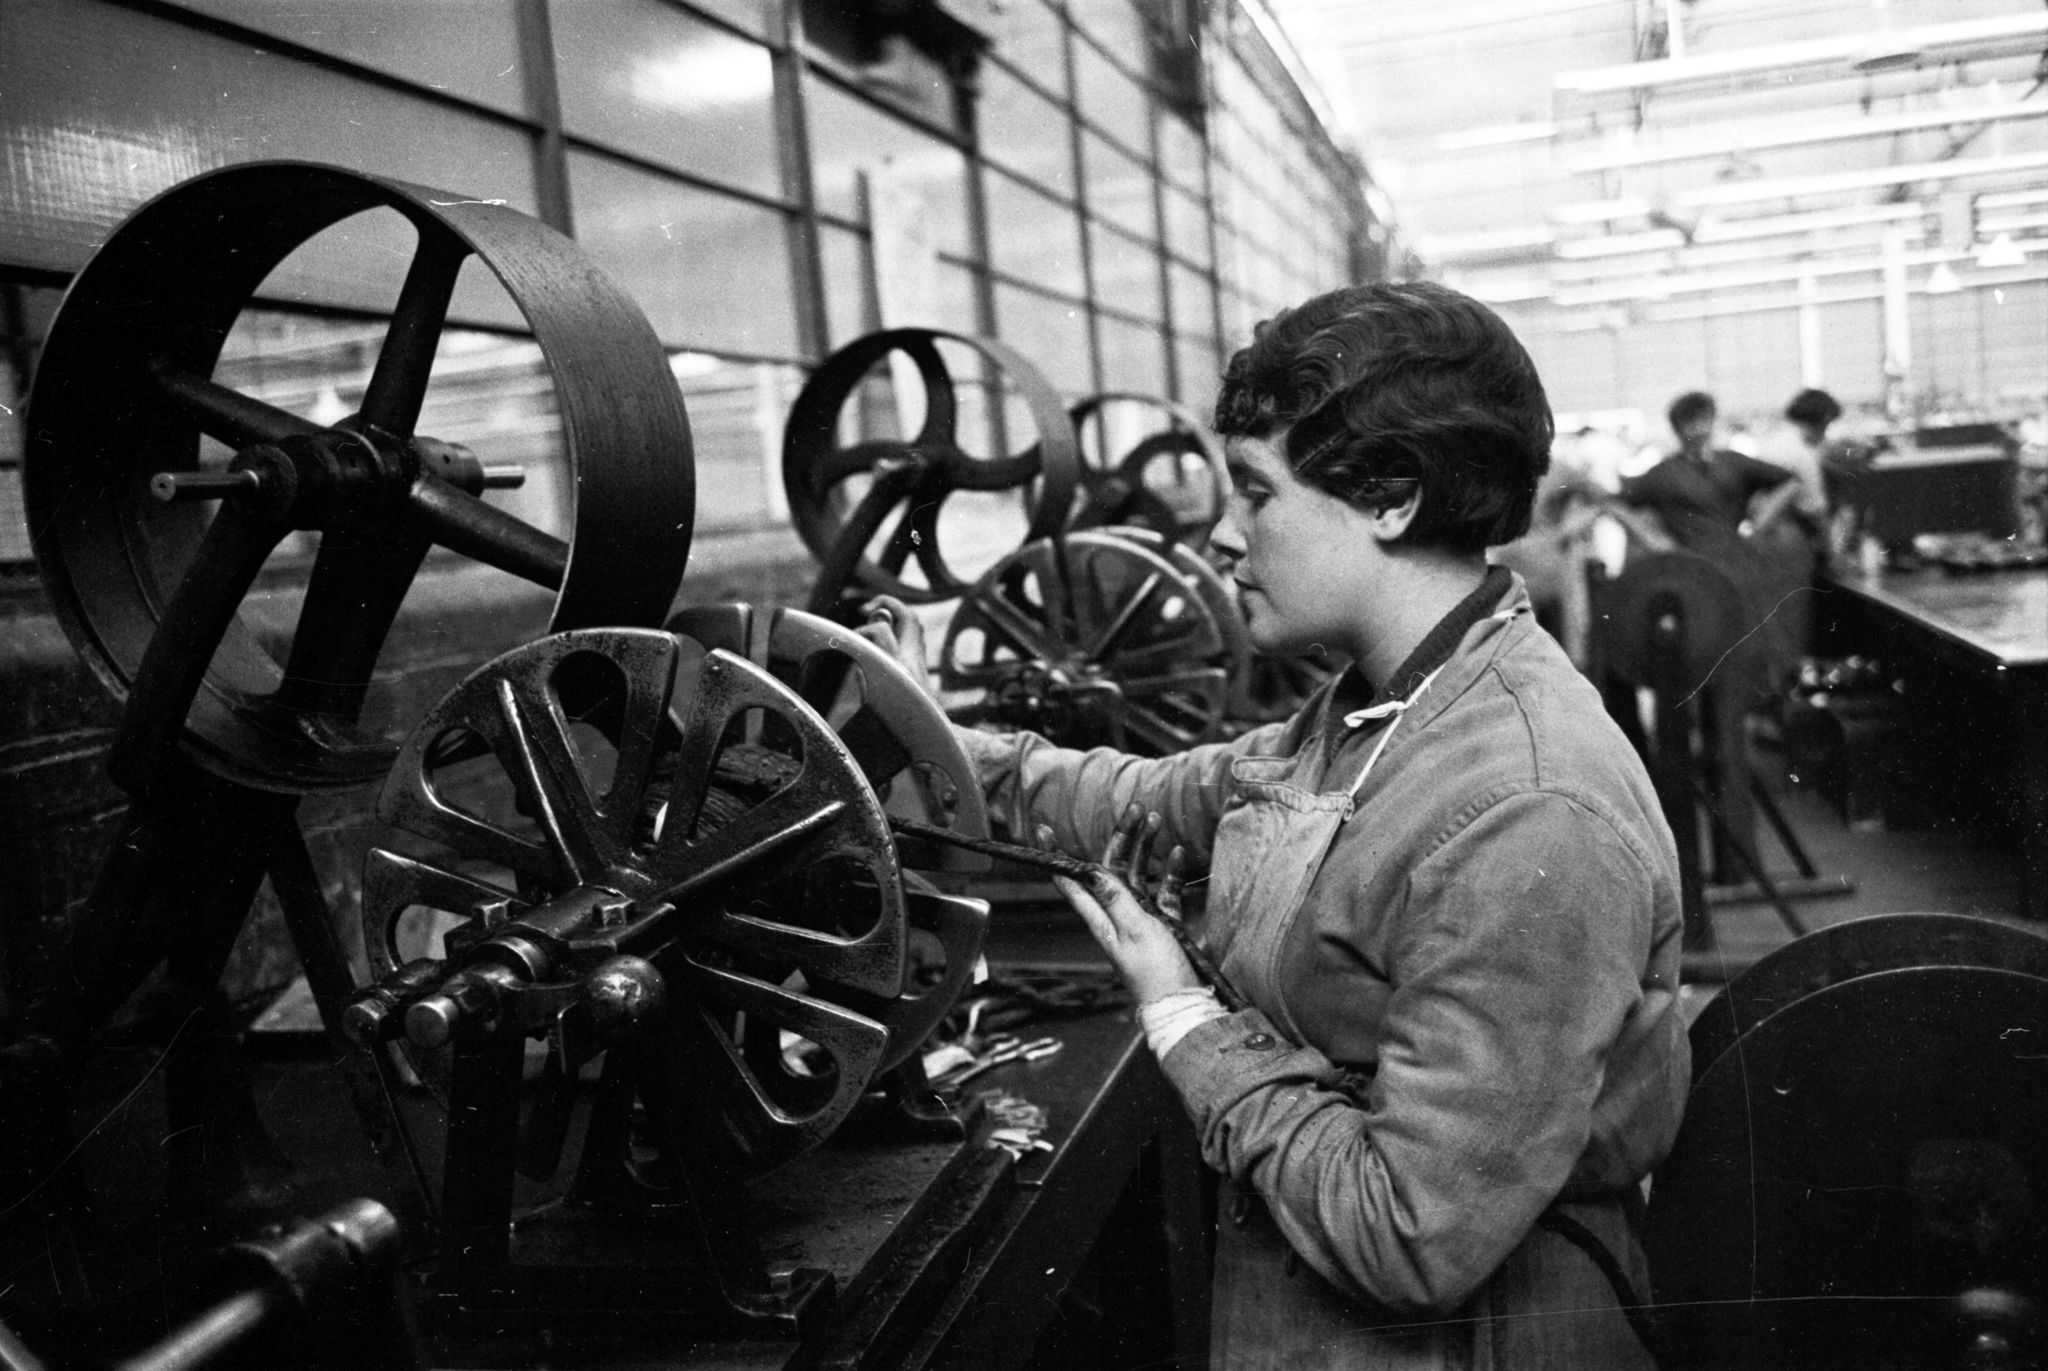 20th August 1955: A woman working the industrial machinery at a Glasgow factory. Glasgow is responsible for more than half of Scotland's industrial output and there are many factories on the Clydeside industrial estates including the Olivetti plant at Queenslie. There are also shipbuilding yards, locomotive production plants and factories owned by tobacco and biscuit companies. Original Publication: Picture Post - 7942 - Let Glasgow Flourish! - pub. 1955 (Photo by Haywood Magee/Picture Post/Hulton Archive/Getty Images)